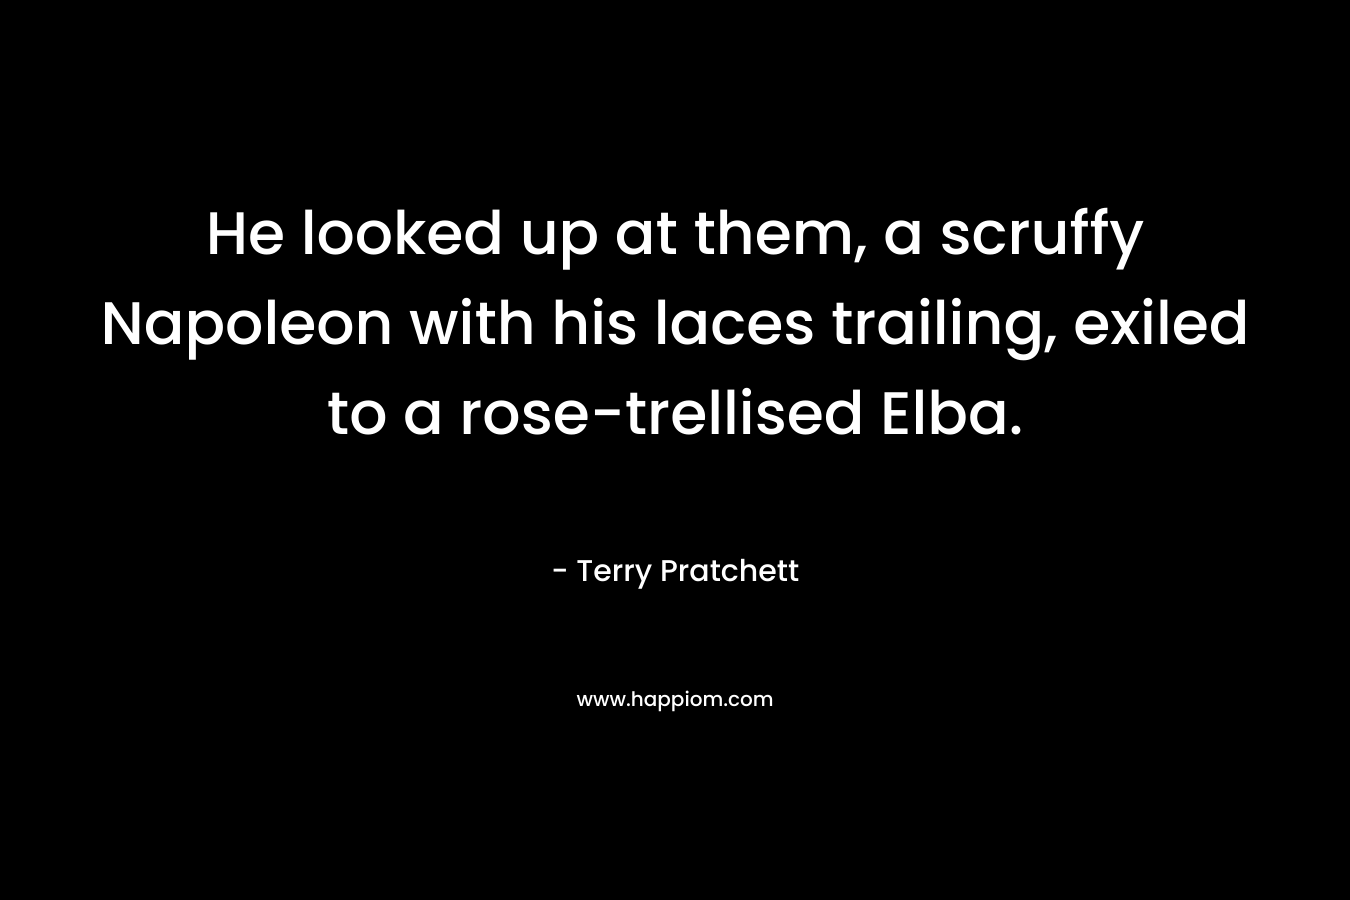 He looked up at them, a scruffy Napoleon with his laces trailing, exiled to a rose-trellised Elba. – Terry Pratchett